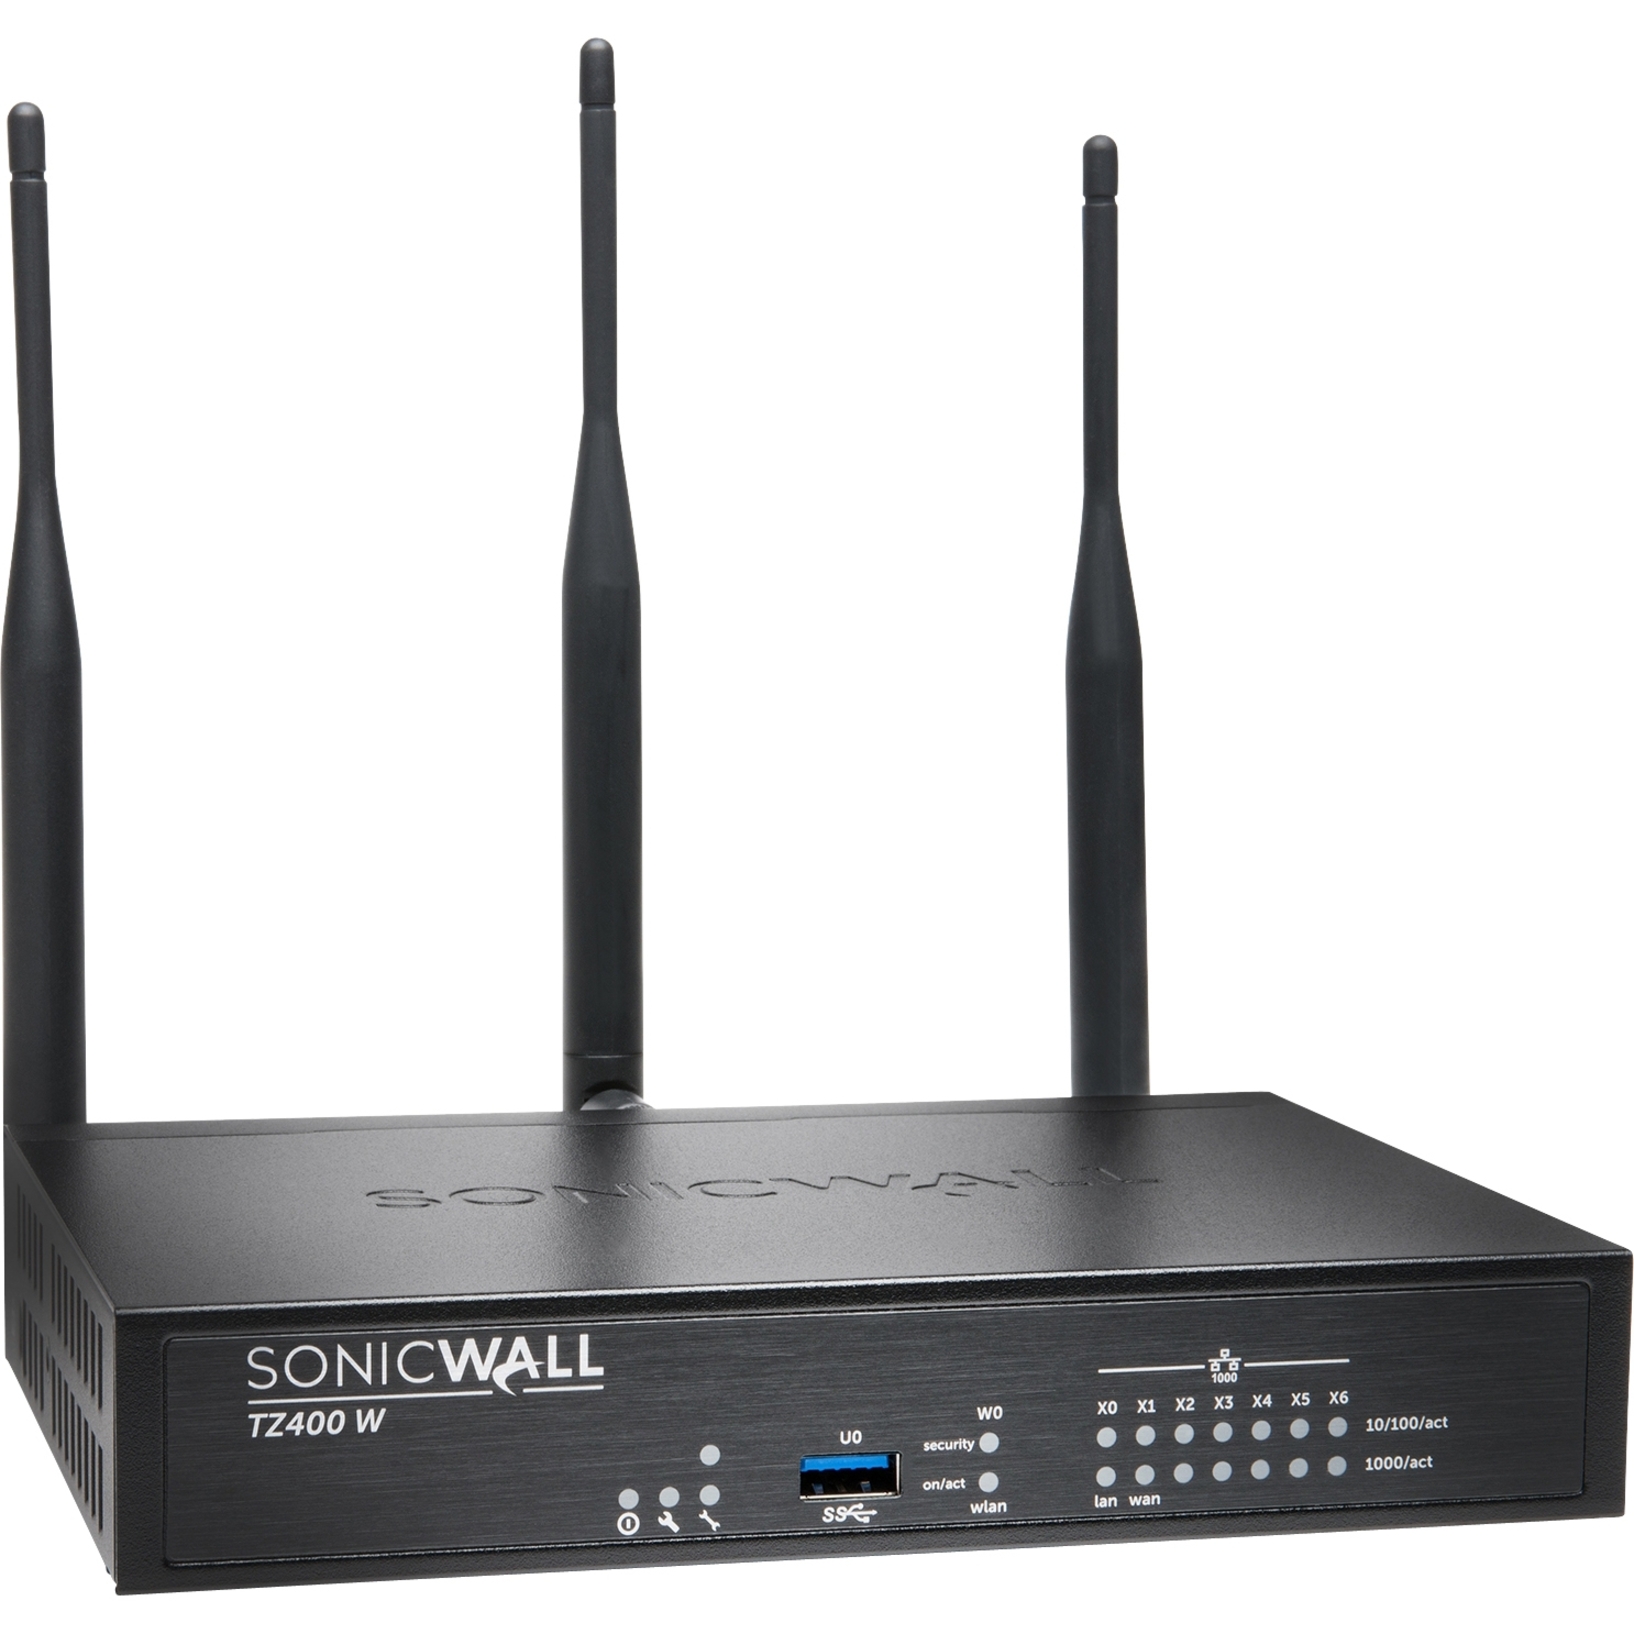 SonicWall TZ400W - Security appliance - with 3 years SonicWALL Advanced Gateway Security Suite - 1GbE - Wi-Fi 5 - 2.4 GHz, 5 GHz - SonicWall Promotional Tradeup - image 3 of 4